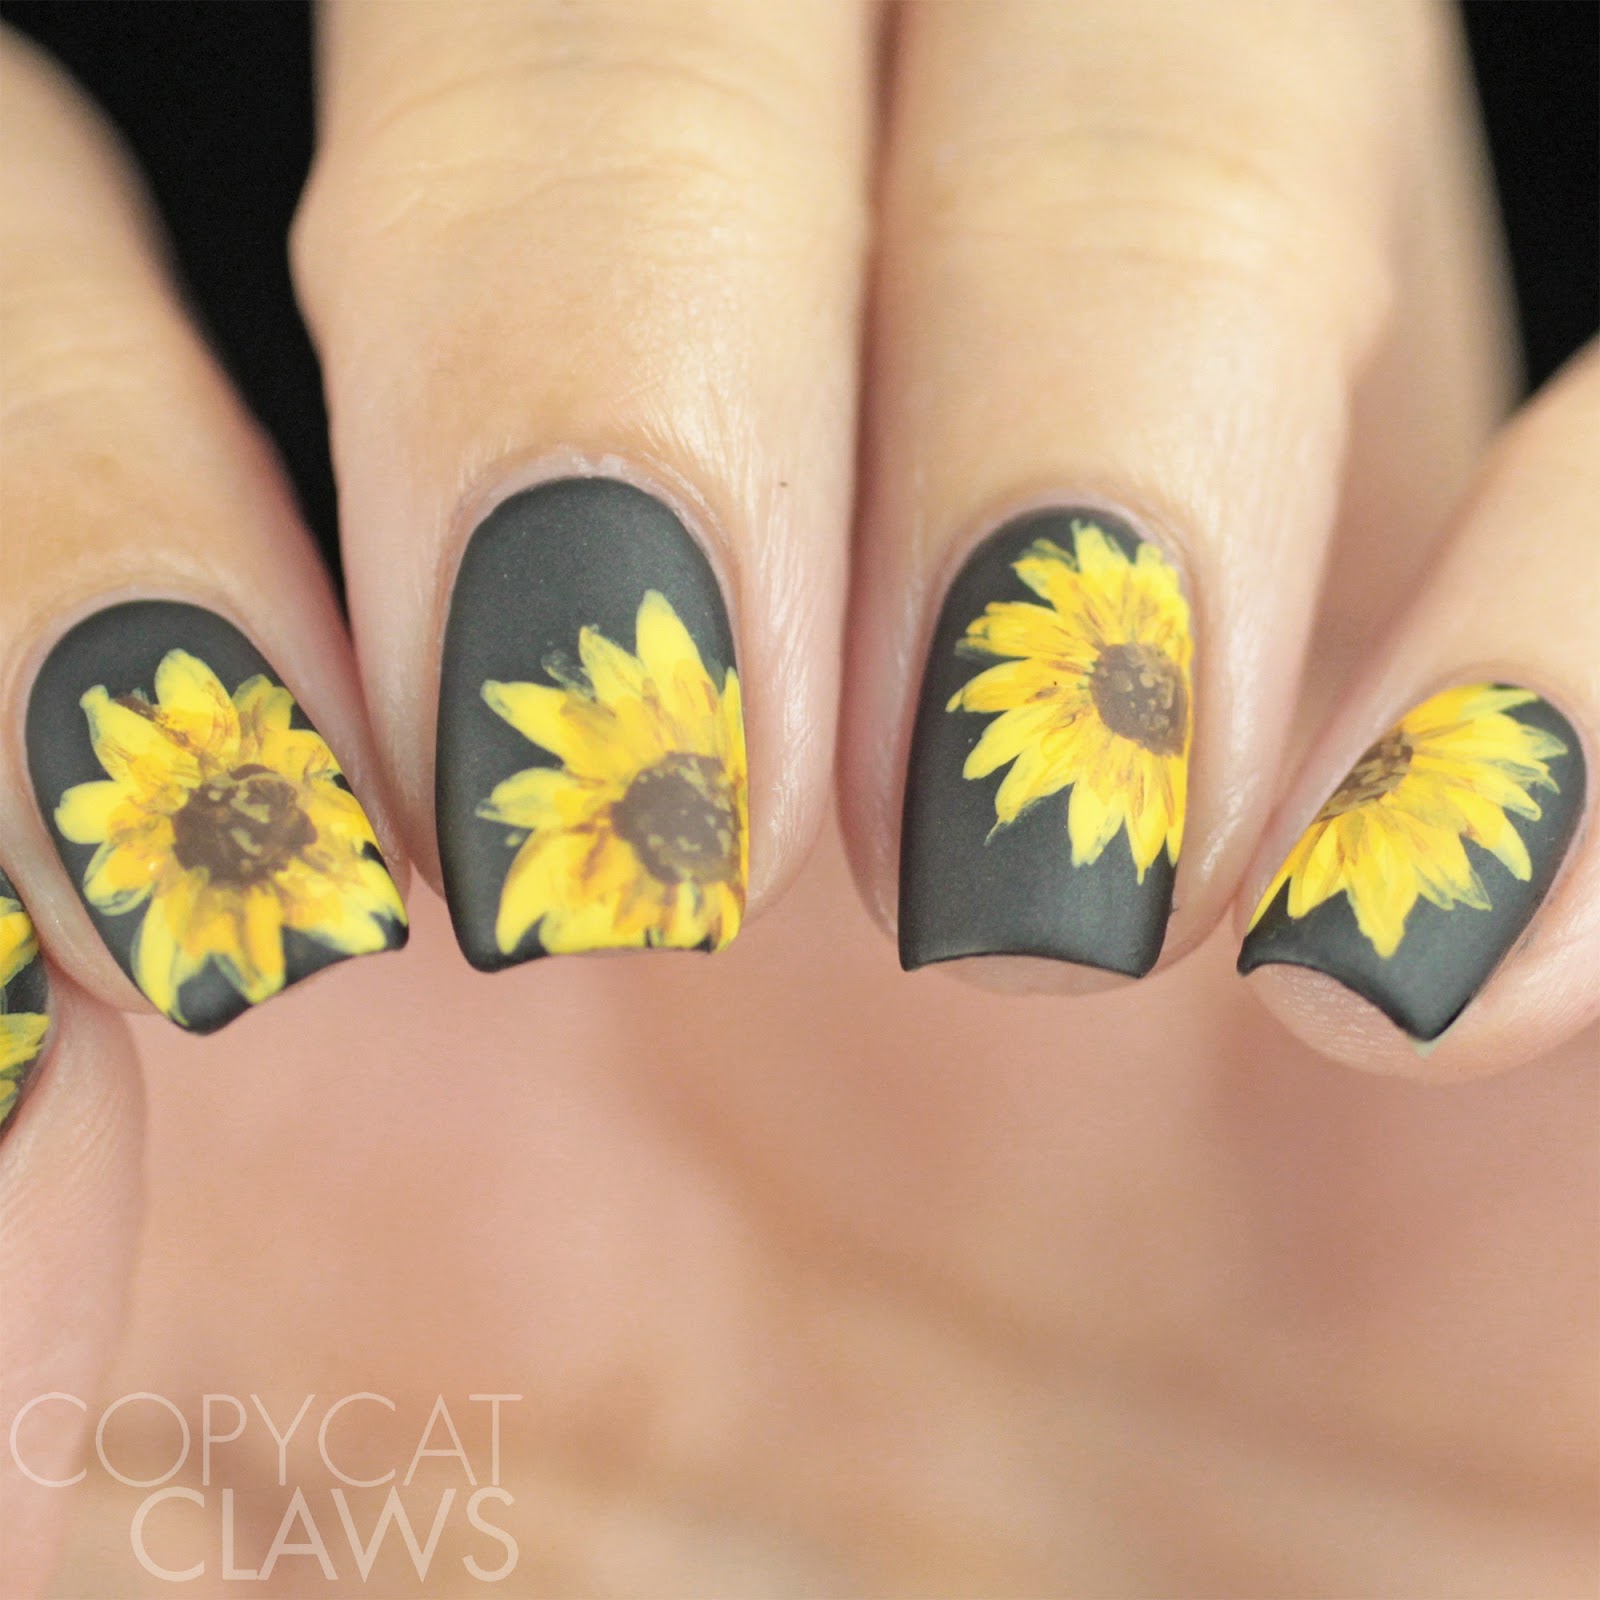 20 Sunflower Nails That Will Make Everyone Jealous | Top Fashion News | Sunflower  nails, Sunflower nail art, Yellow nails